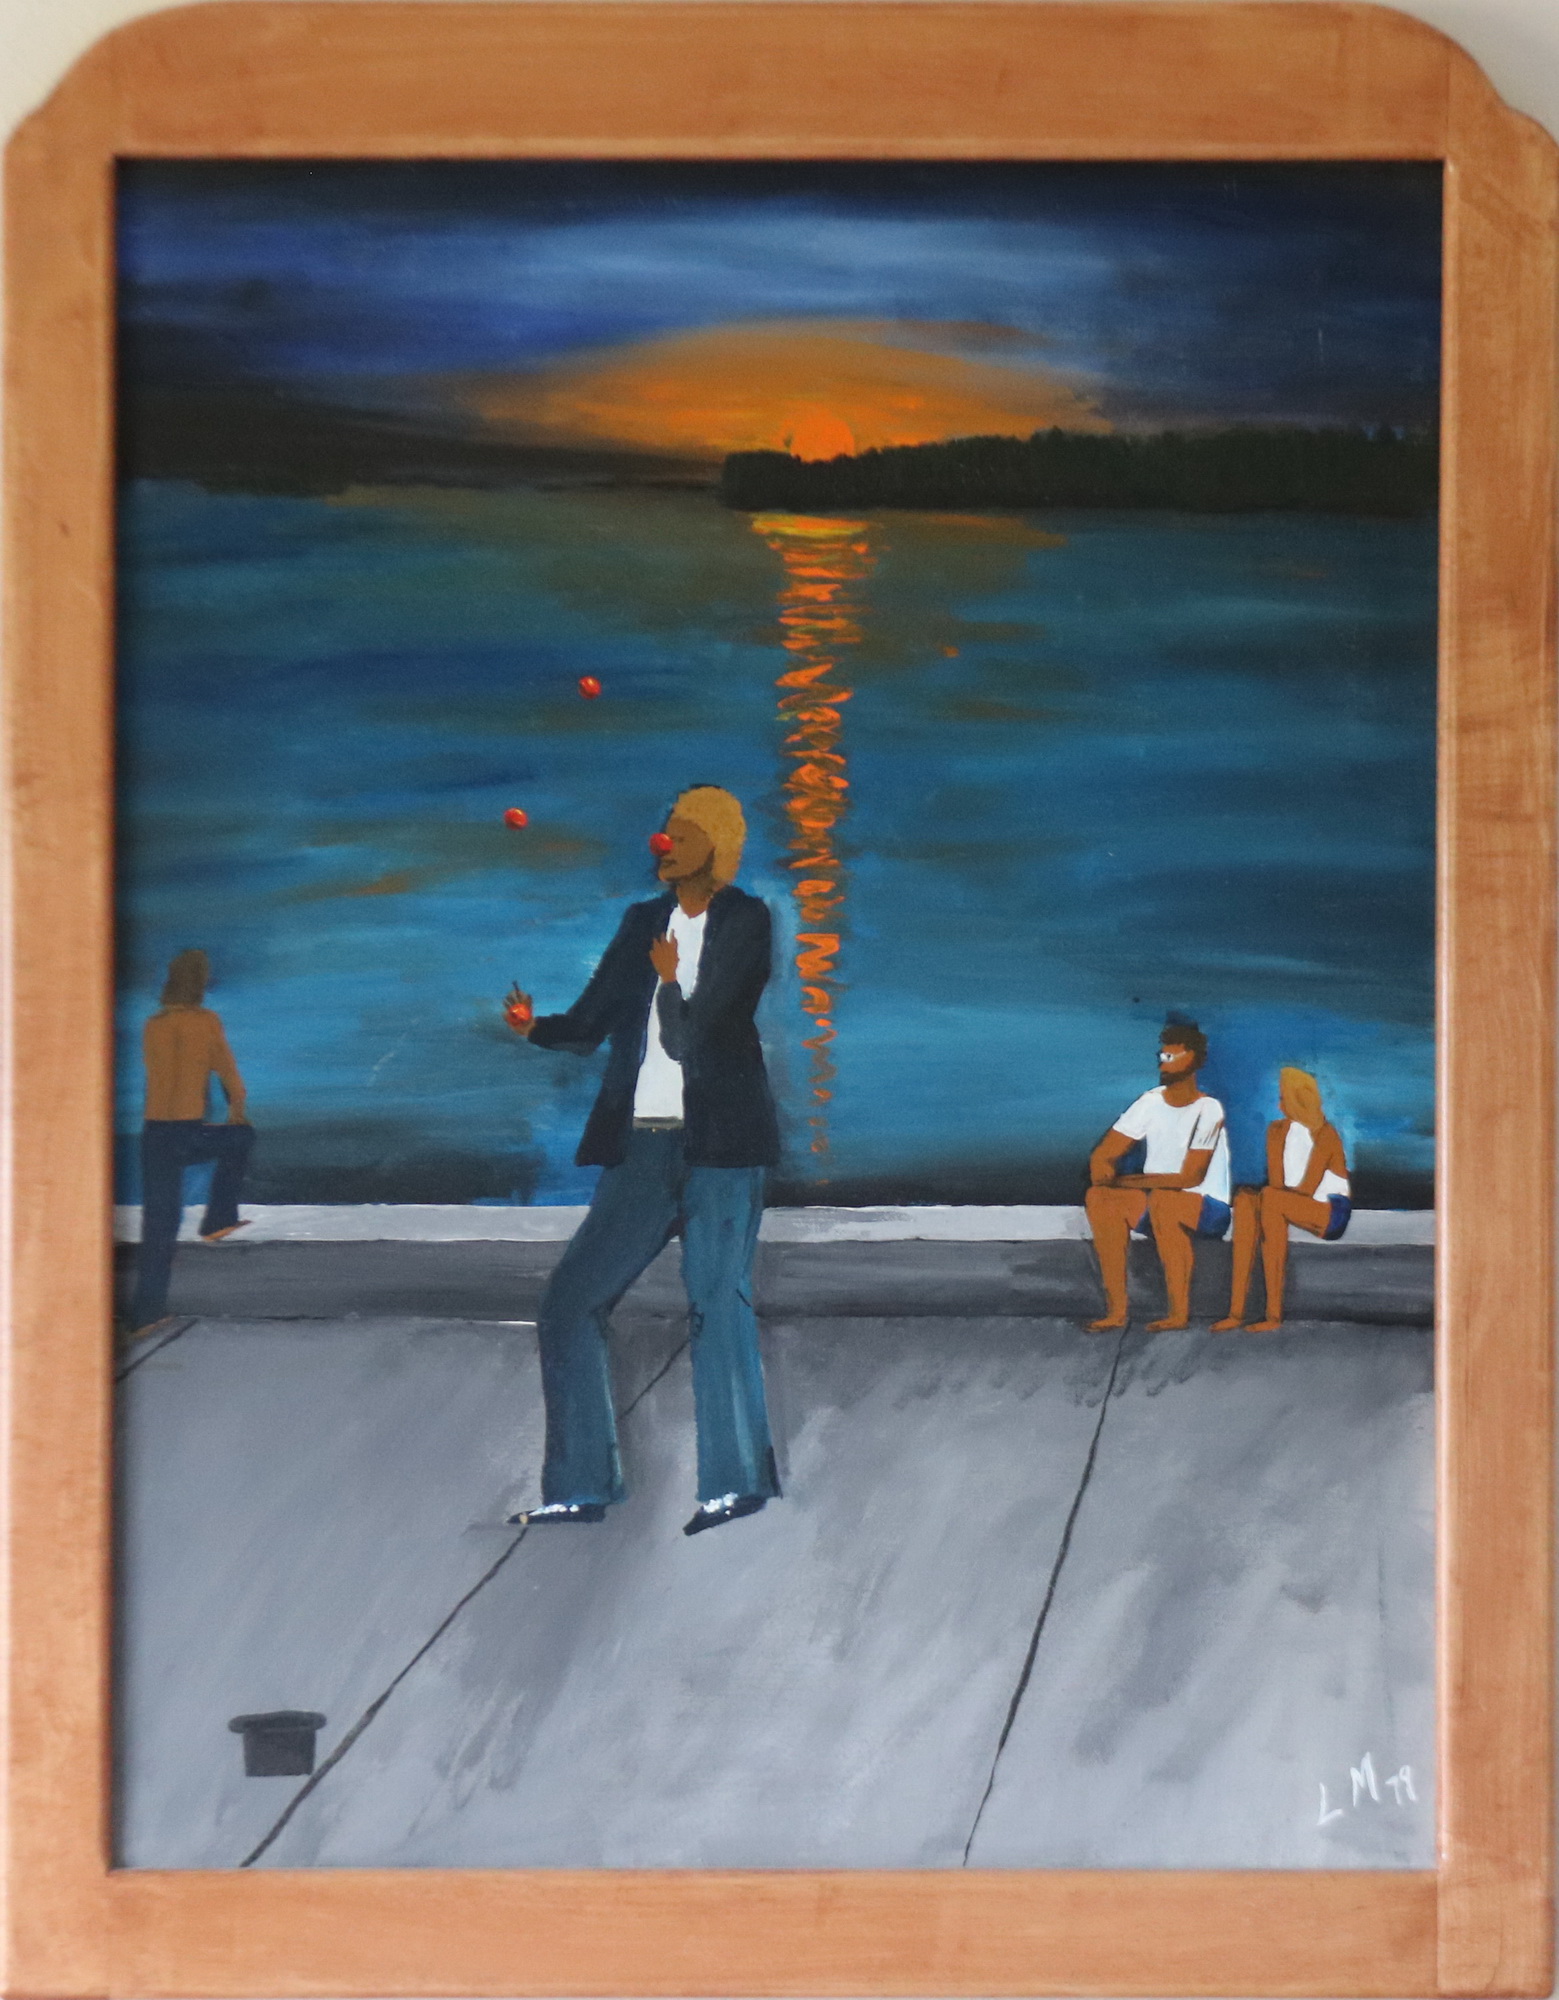 Juggler at Mallory Square<br/>1979<br/>Scene from Key West where I went scuba diving with a friend Craig.  Craig and his wife are sitting on the dock.  Hangs over my bed with frame I made to match the bed.